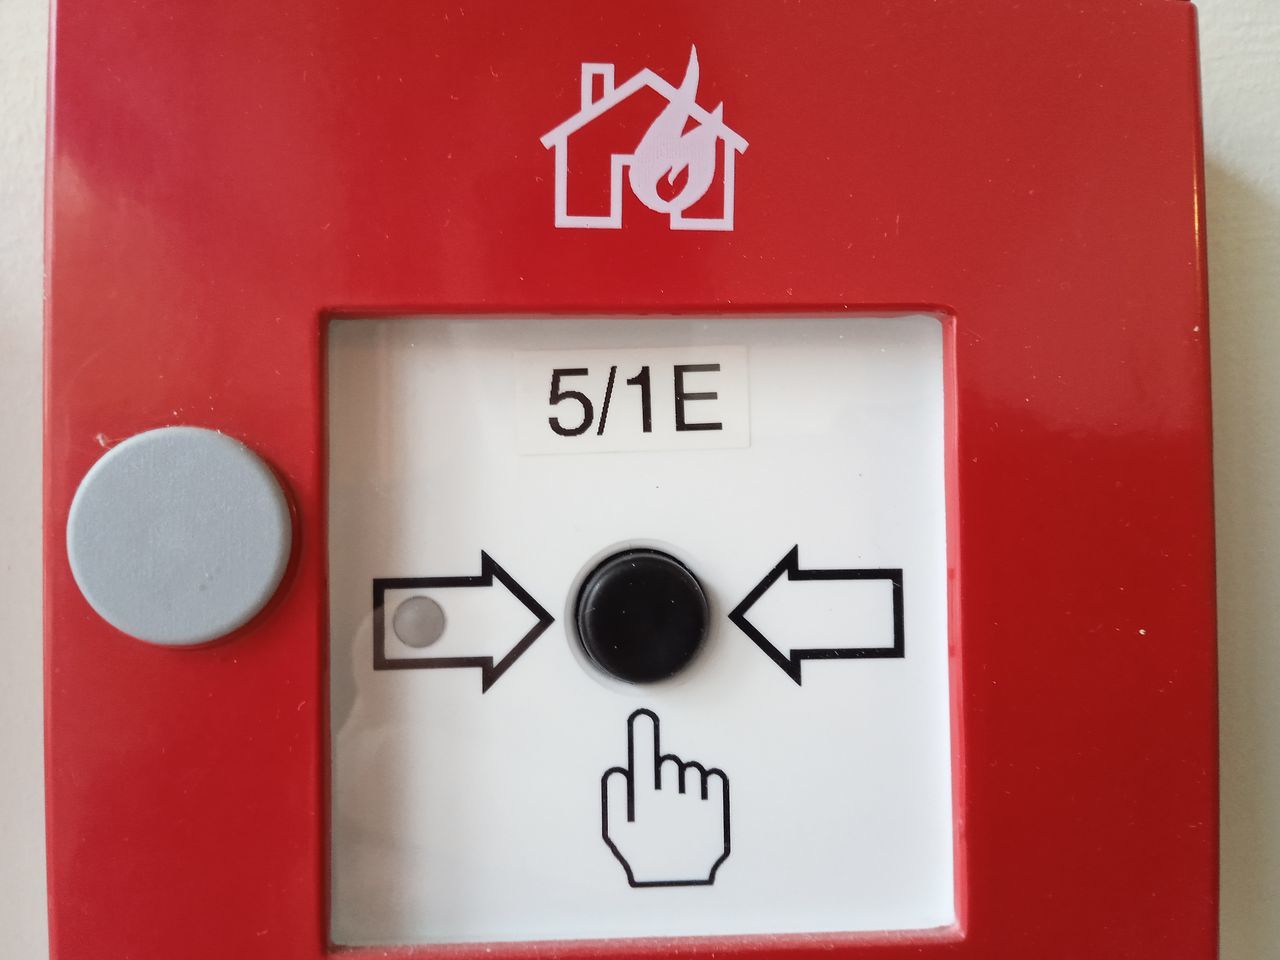 communication, sign, red, text, western script, no people, close-up, protection, fire alarm, accidents and disasters, number, security, technology, warning sign, door, control, entrance, guidance